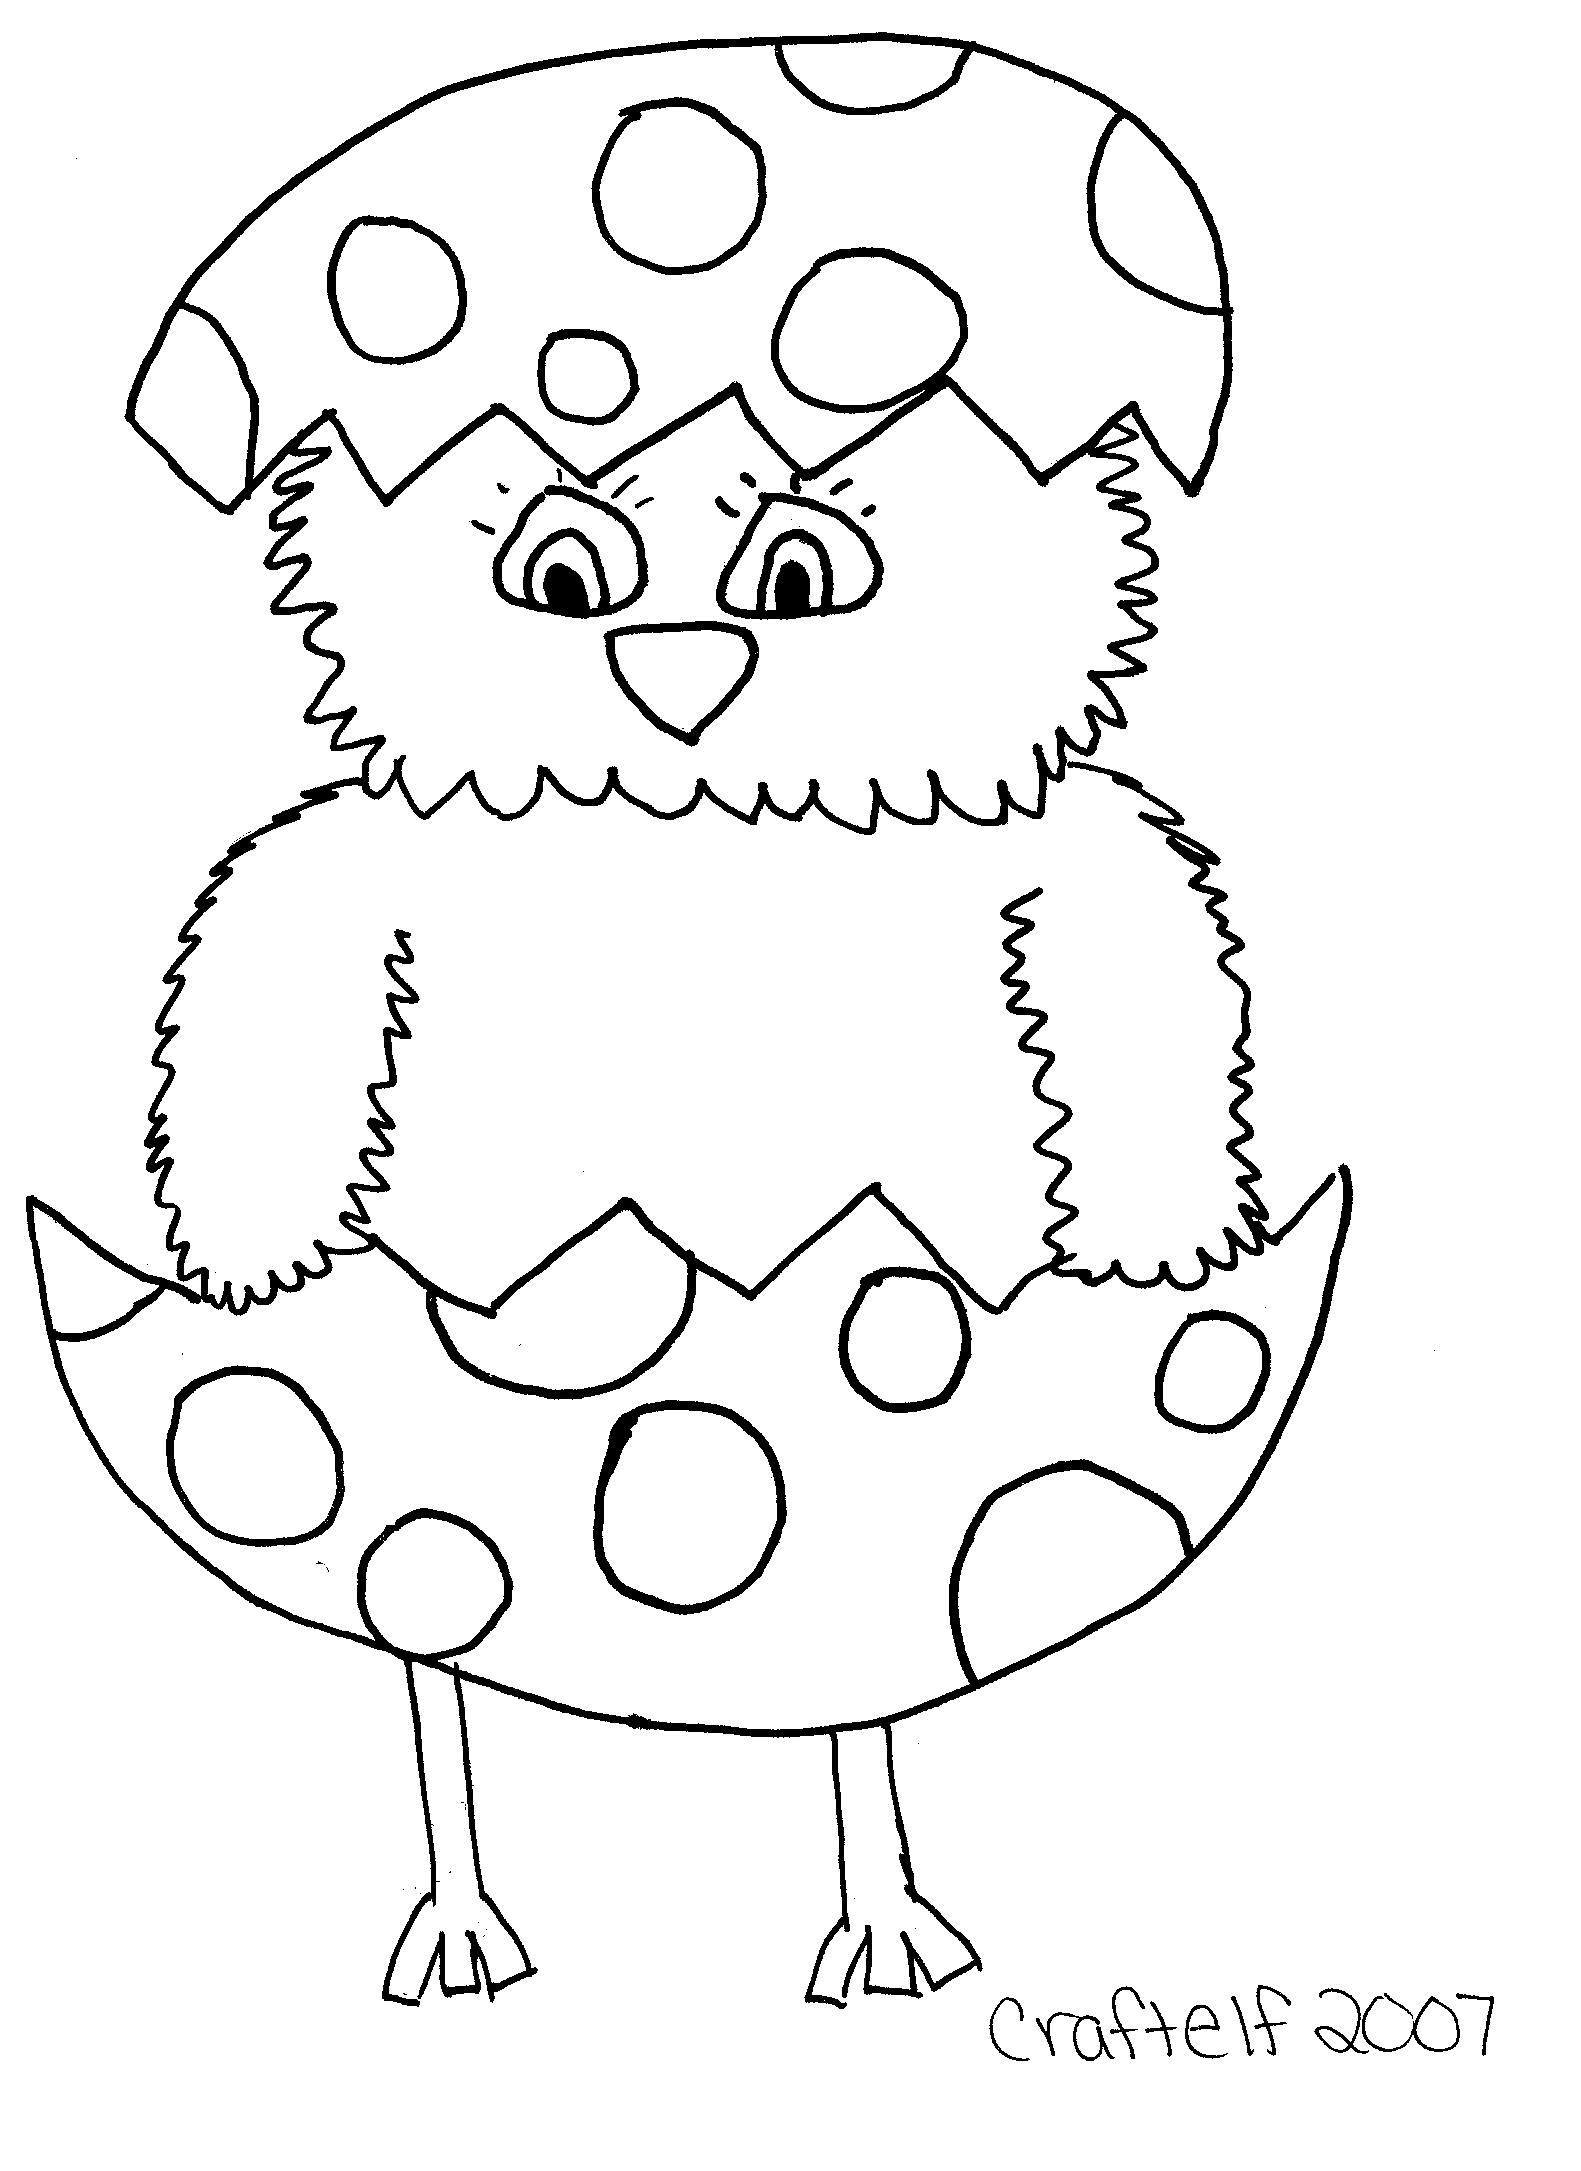 Coloring Pages : Religeous Easter Coloring Pages Printable Free For - Free Printable Easter Pages